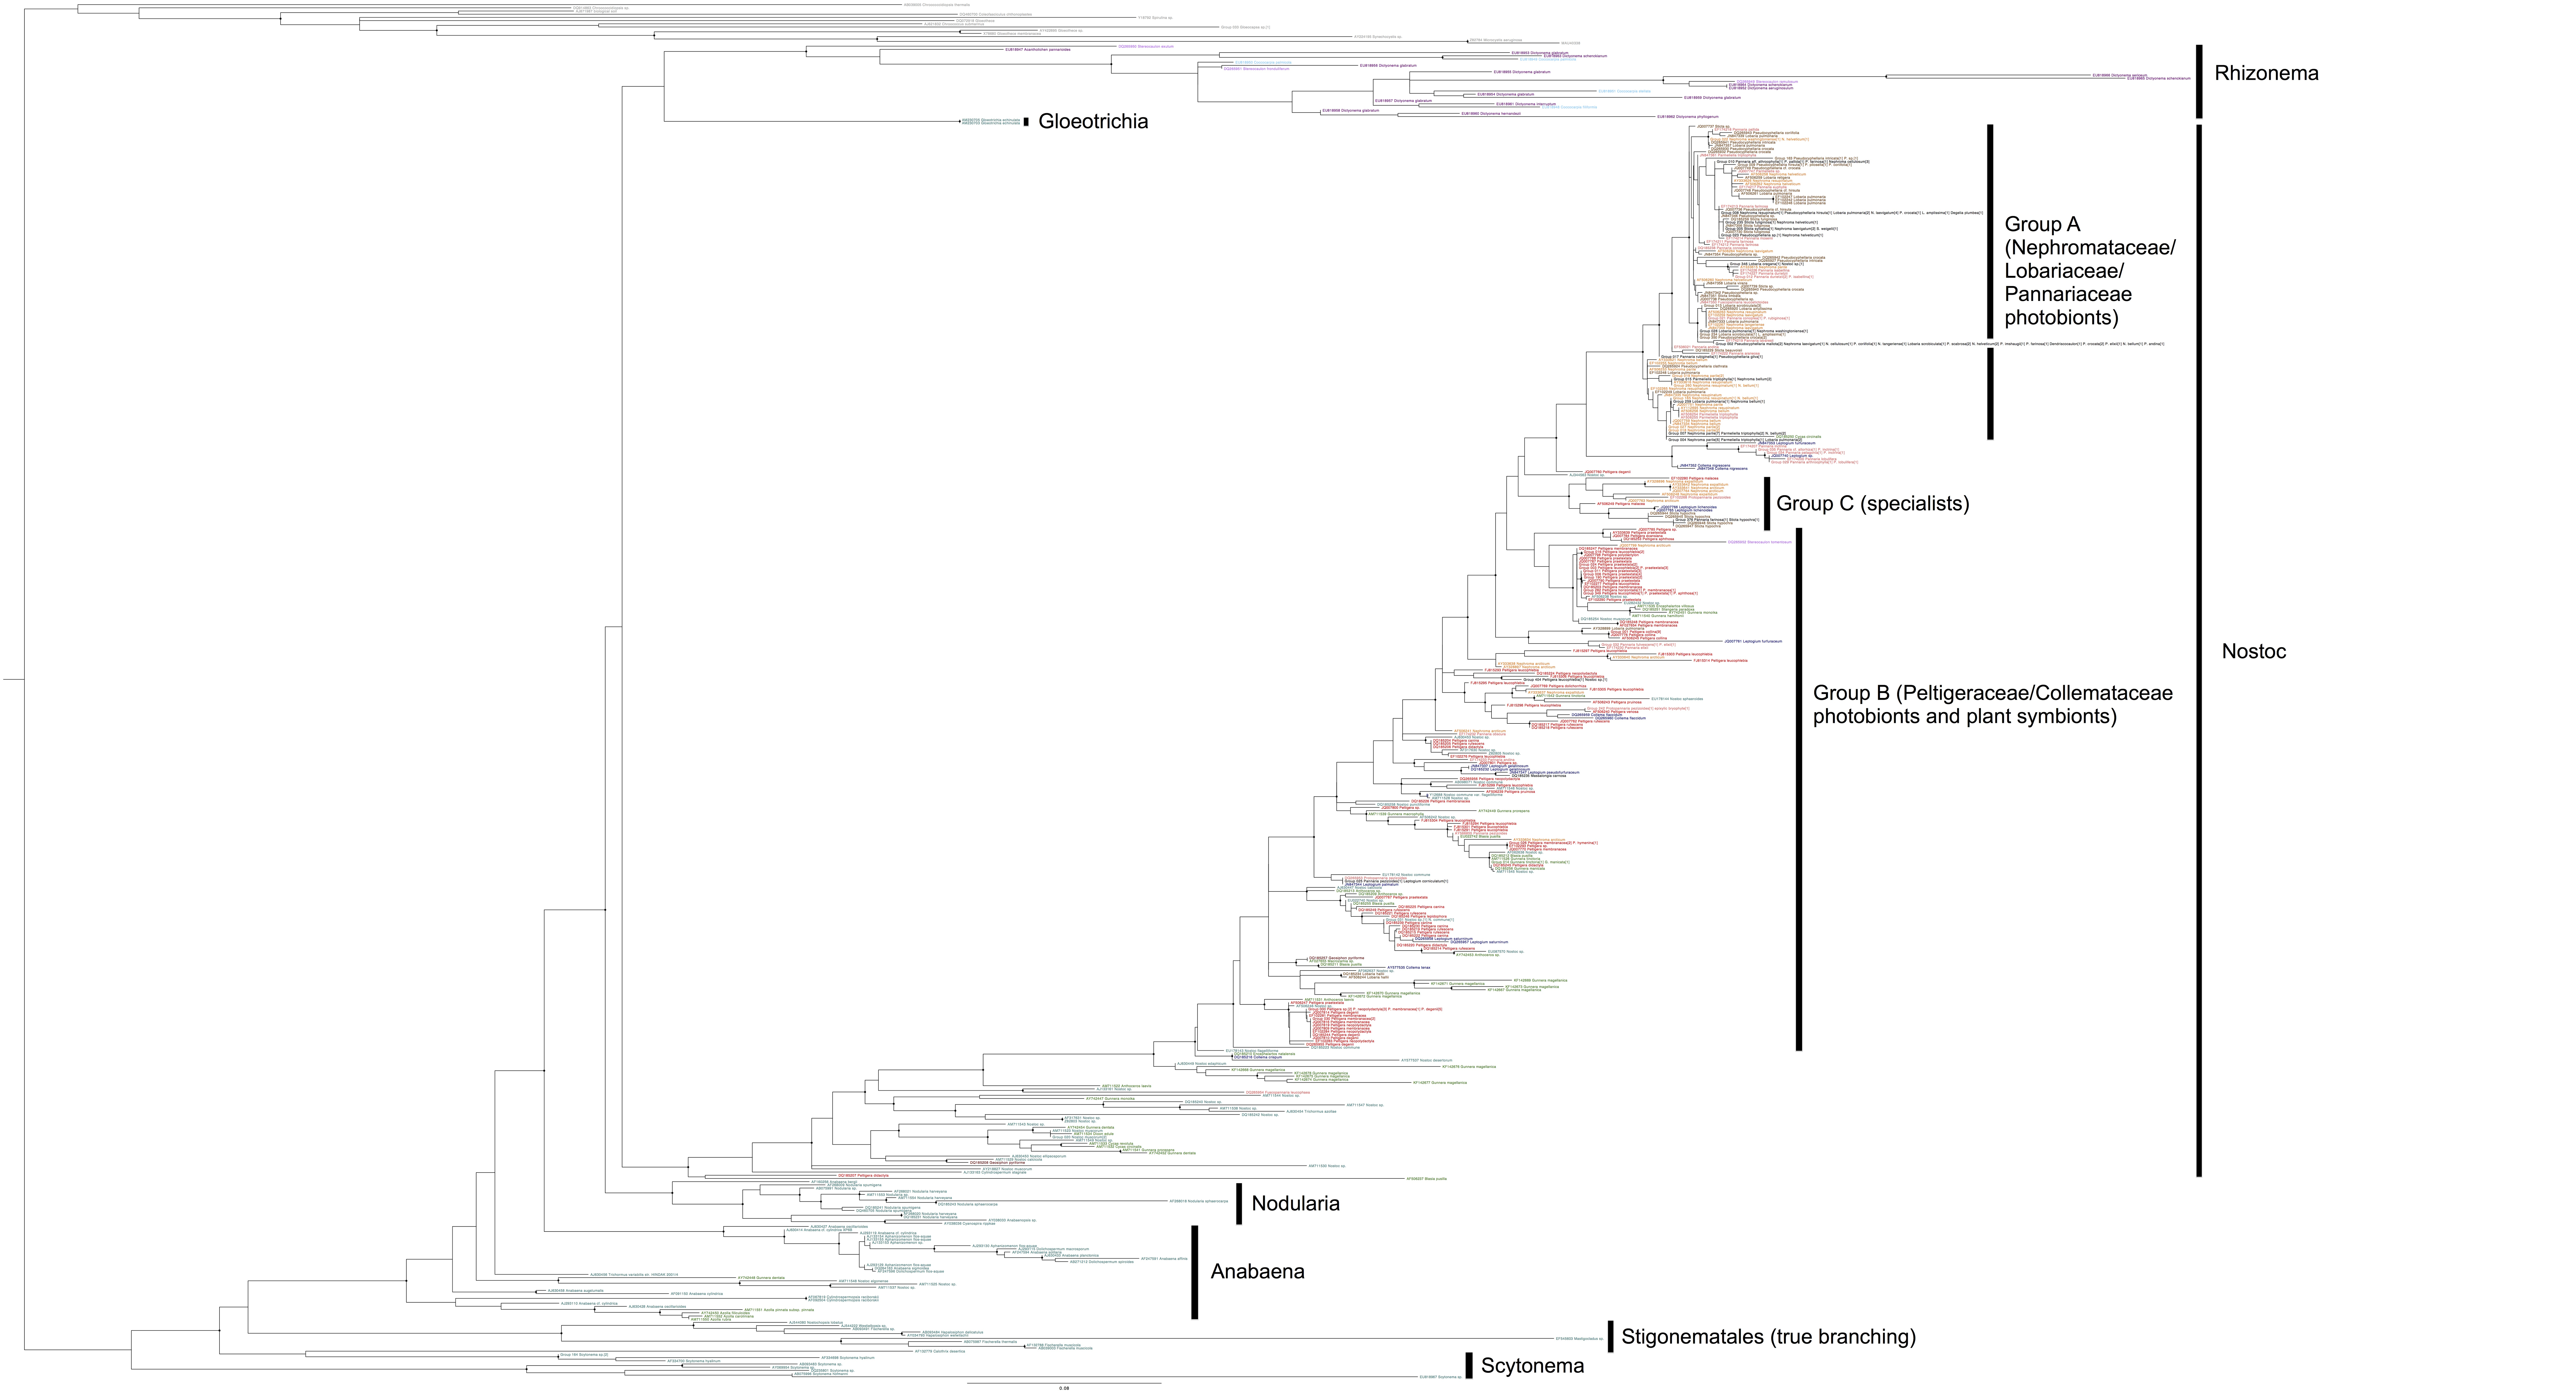  Cyanobacterial 16S phylogeny, coloured by host family (light purple: Stereocaulaceae, dark purple: Basidiolichens, dark brown: Geosiphon, light brown: Lobariaceae, red: Peltigeraceae, dark blue: Collemetaceae, light blue: Coccocarpiaceae, orange: Nephromataceae, pink: Pannariaceae, green: plant hosts, cyan: free-living). Names in black indicate genotypes found in more than one group.Grey indicates outgroups. Circles on internal nodes indicate aLRT ≥0.9.